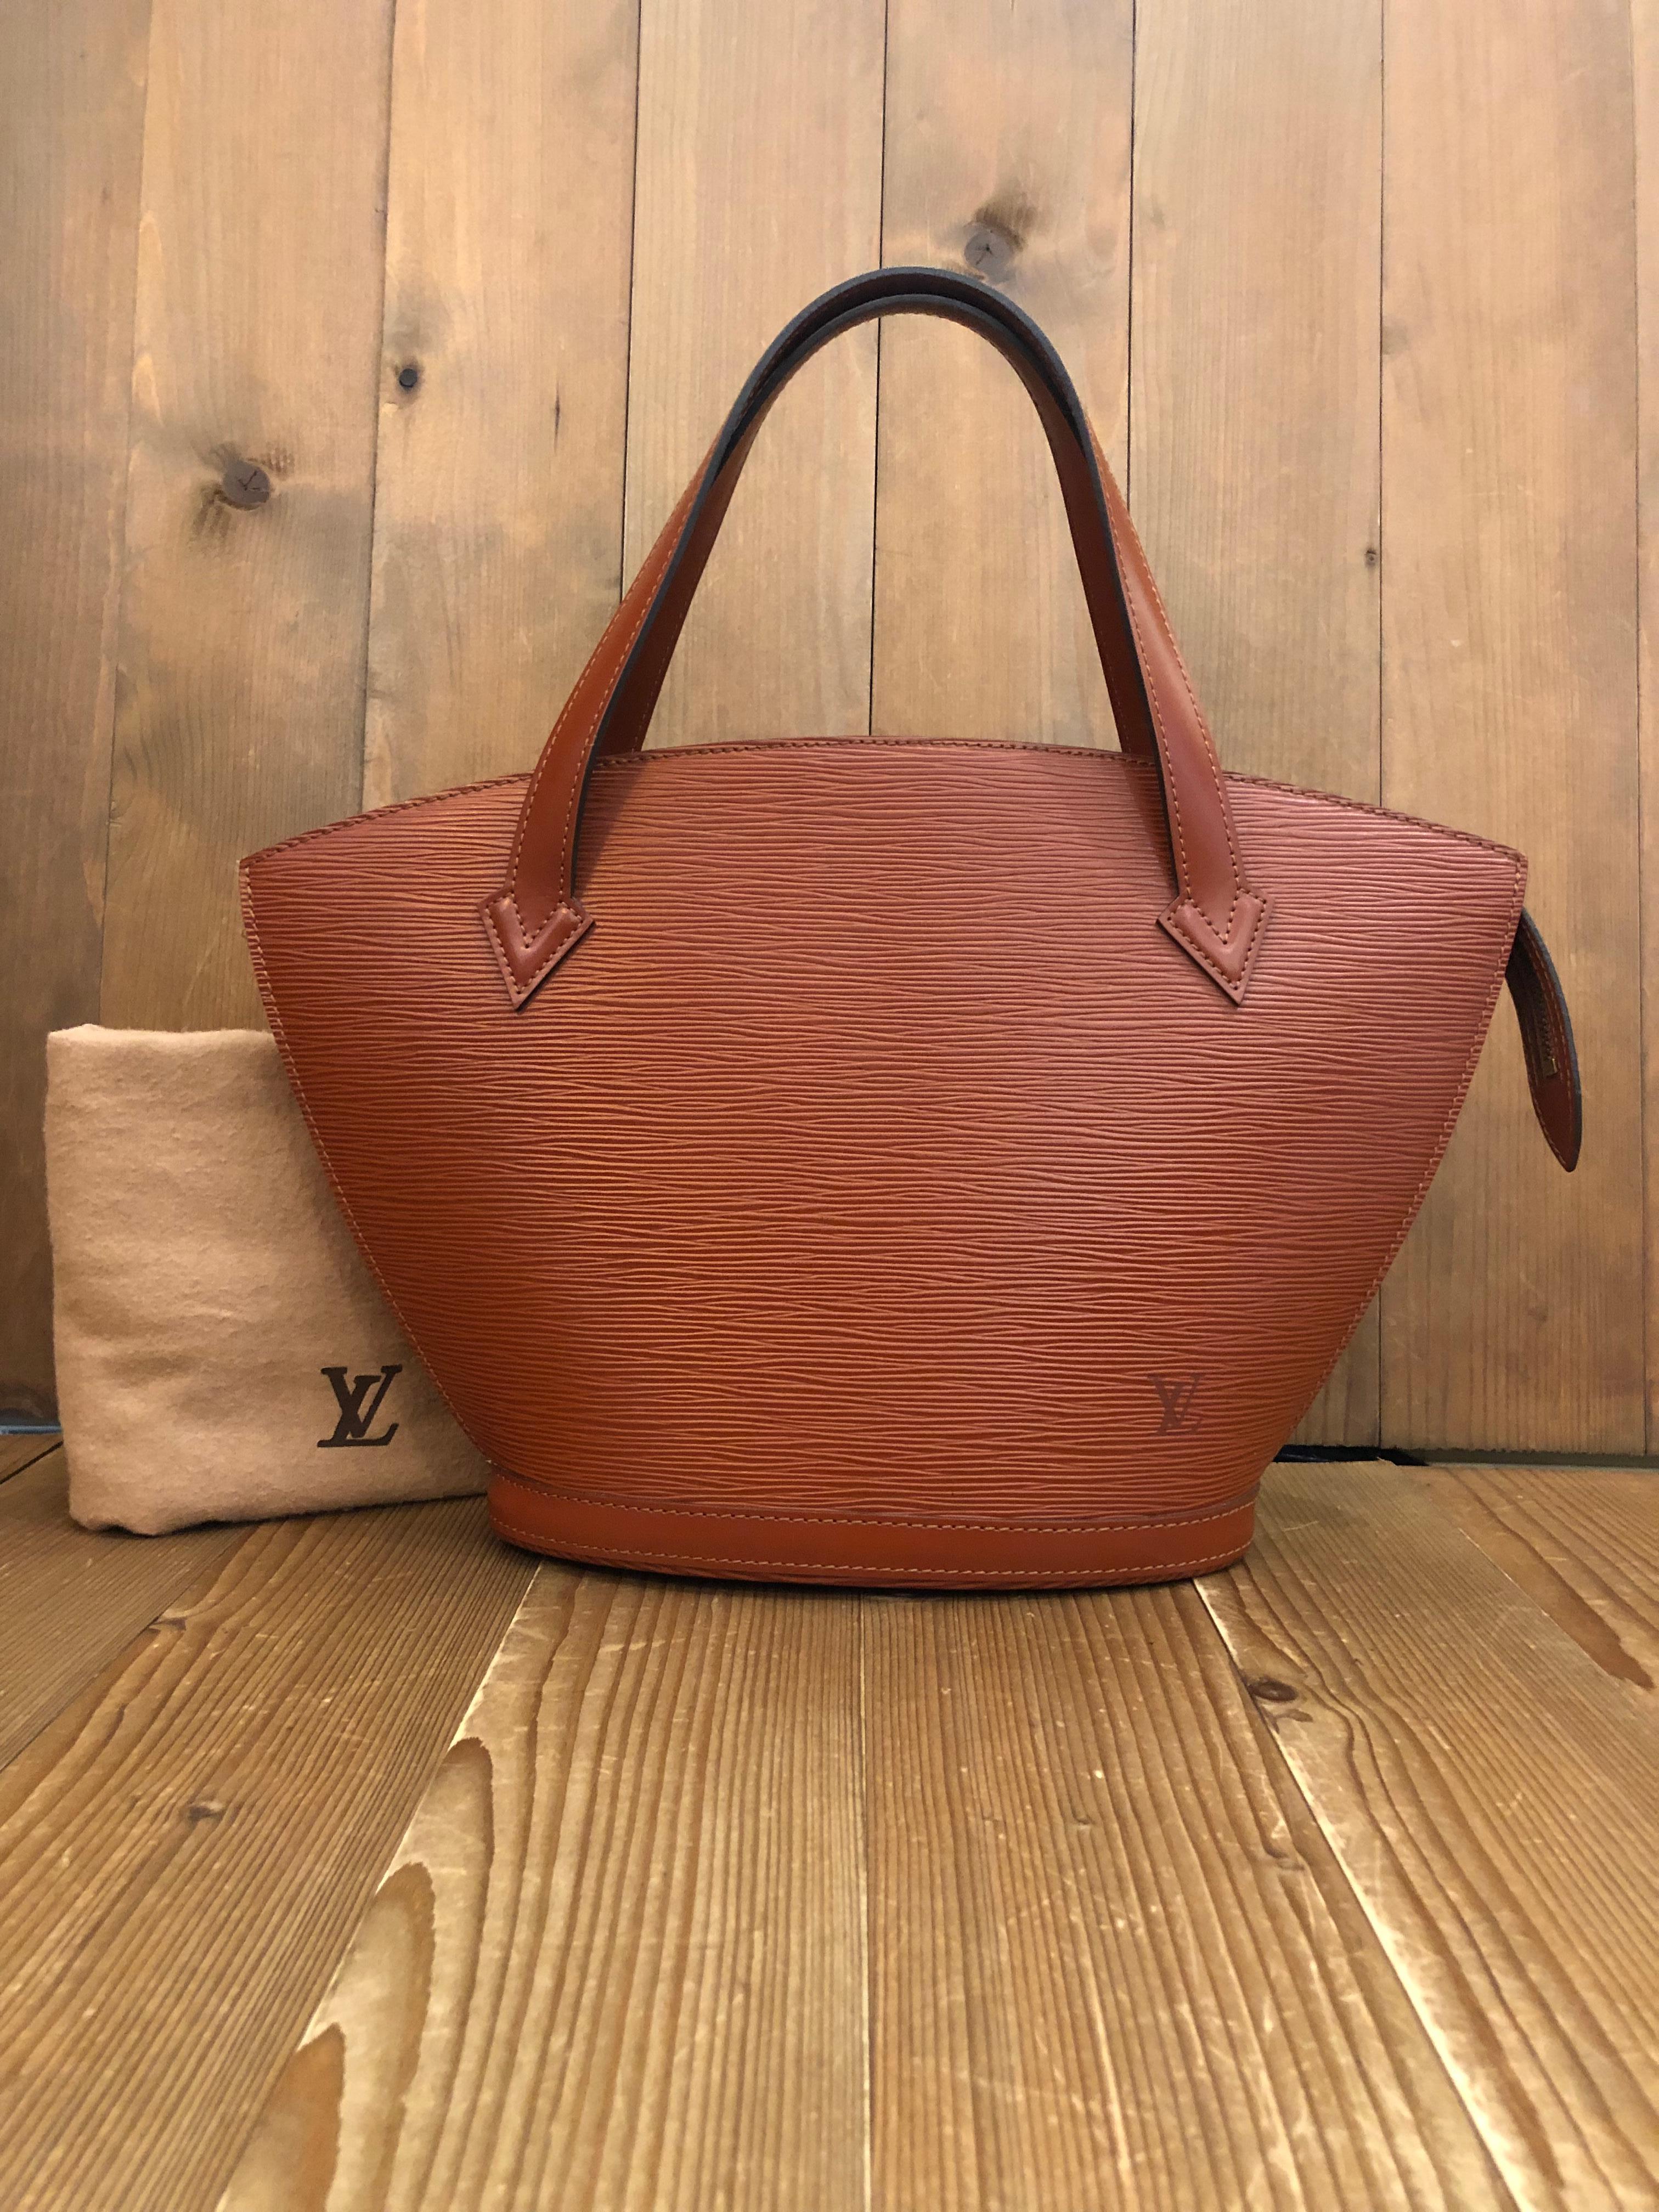 This Vintage LOUIS VUITTON Saint Jacques PM tote bag is crafted of LV signature Epi leather in brown and smooth brown leather. Zipper top closure opens to a brown microfiber interior with one zippered pocket for your daily essentials. Made in France